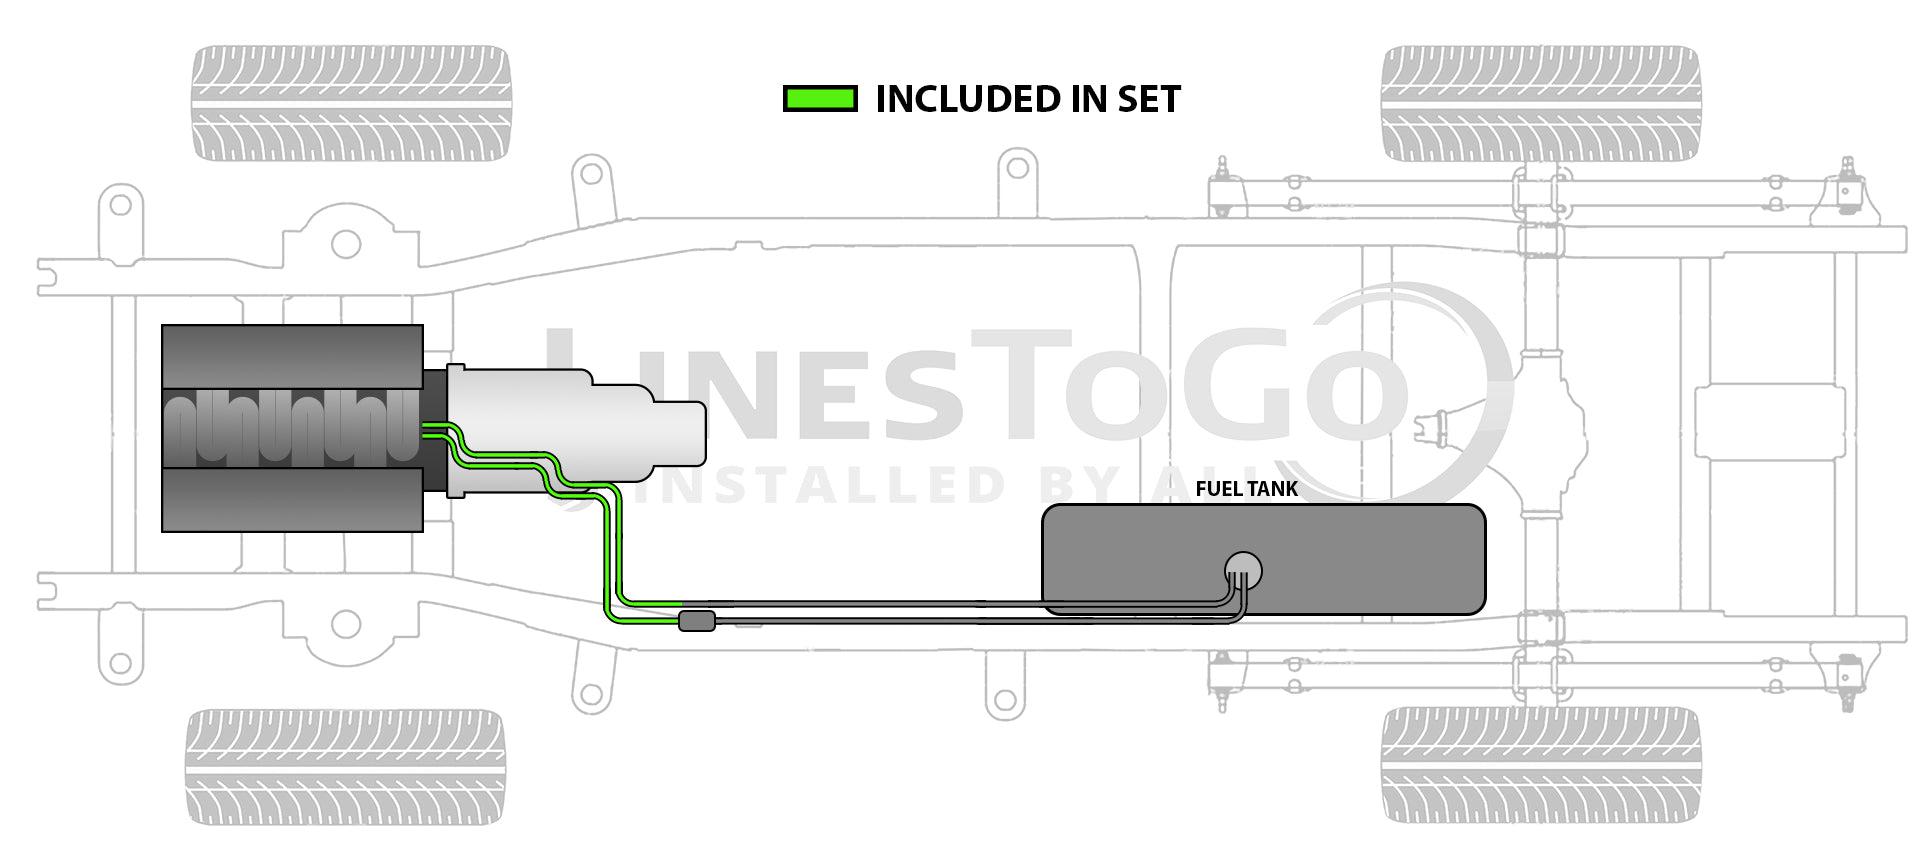 Chevy Silverado Front Fuel Line Set 2000 Cab & Chassis 4WD 135.5"/159.5" WB 5.7L SS398-J5C Stainless Steel